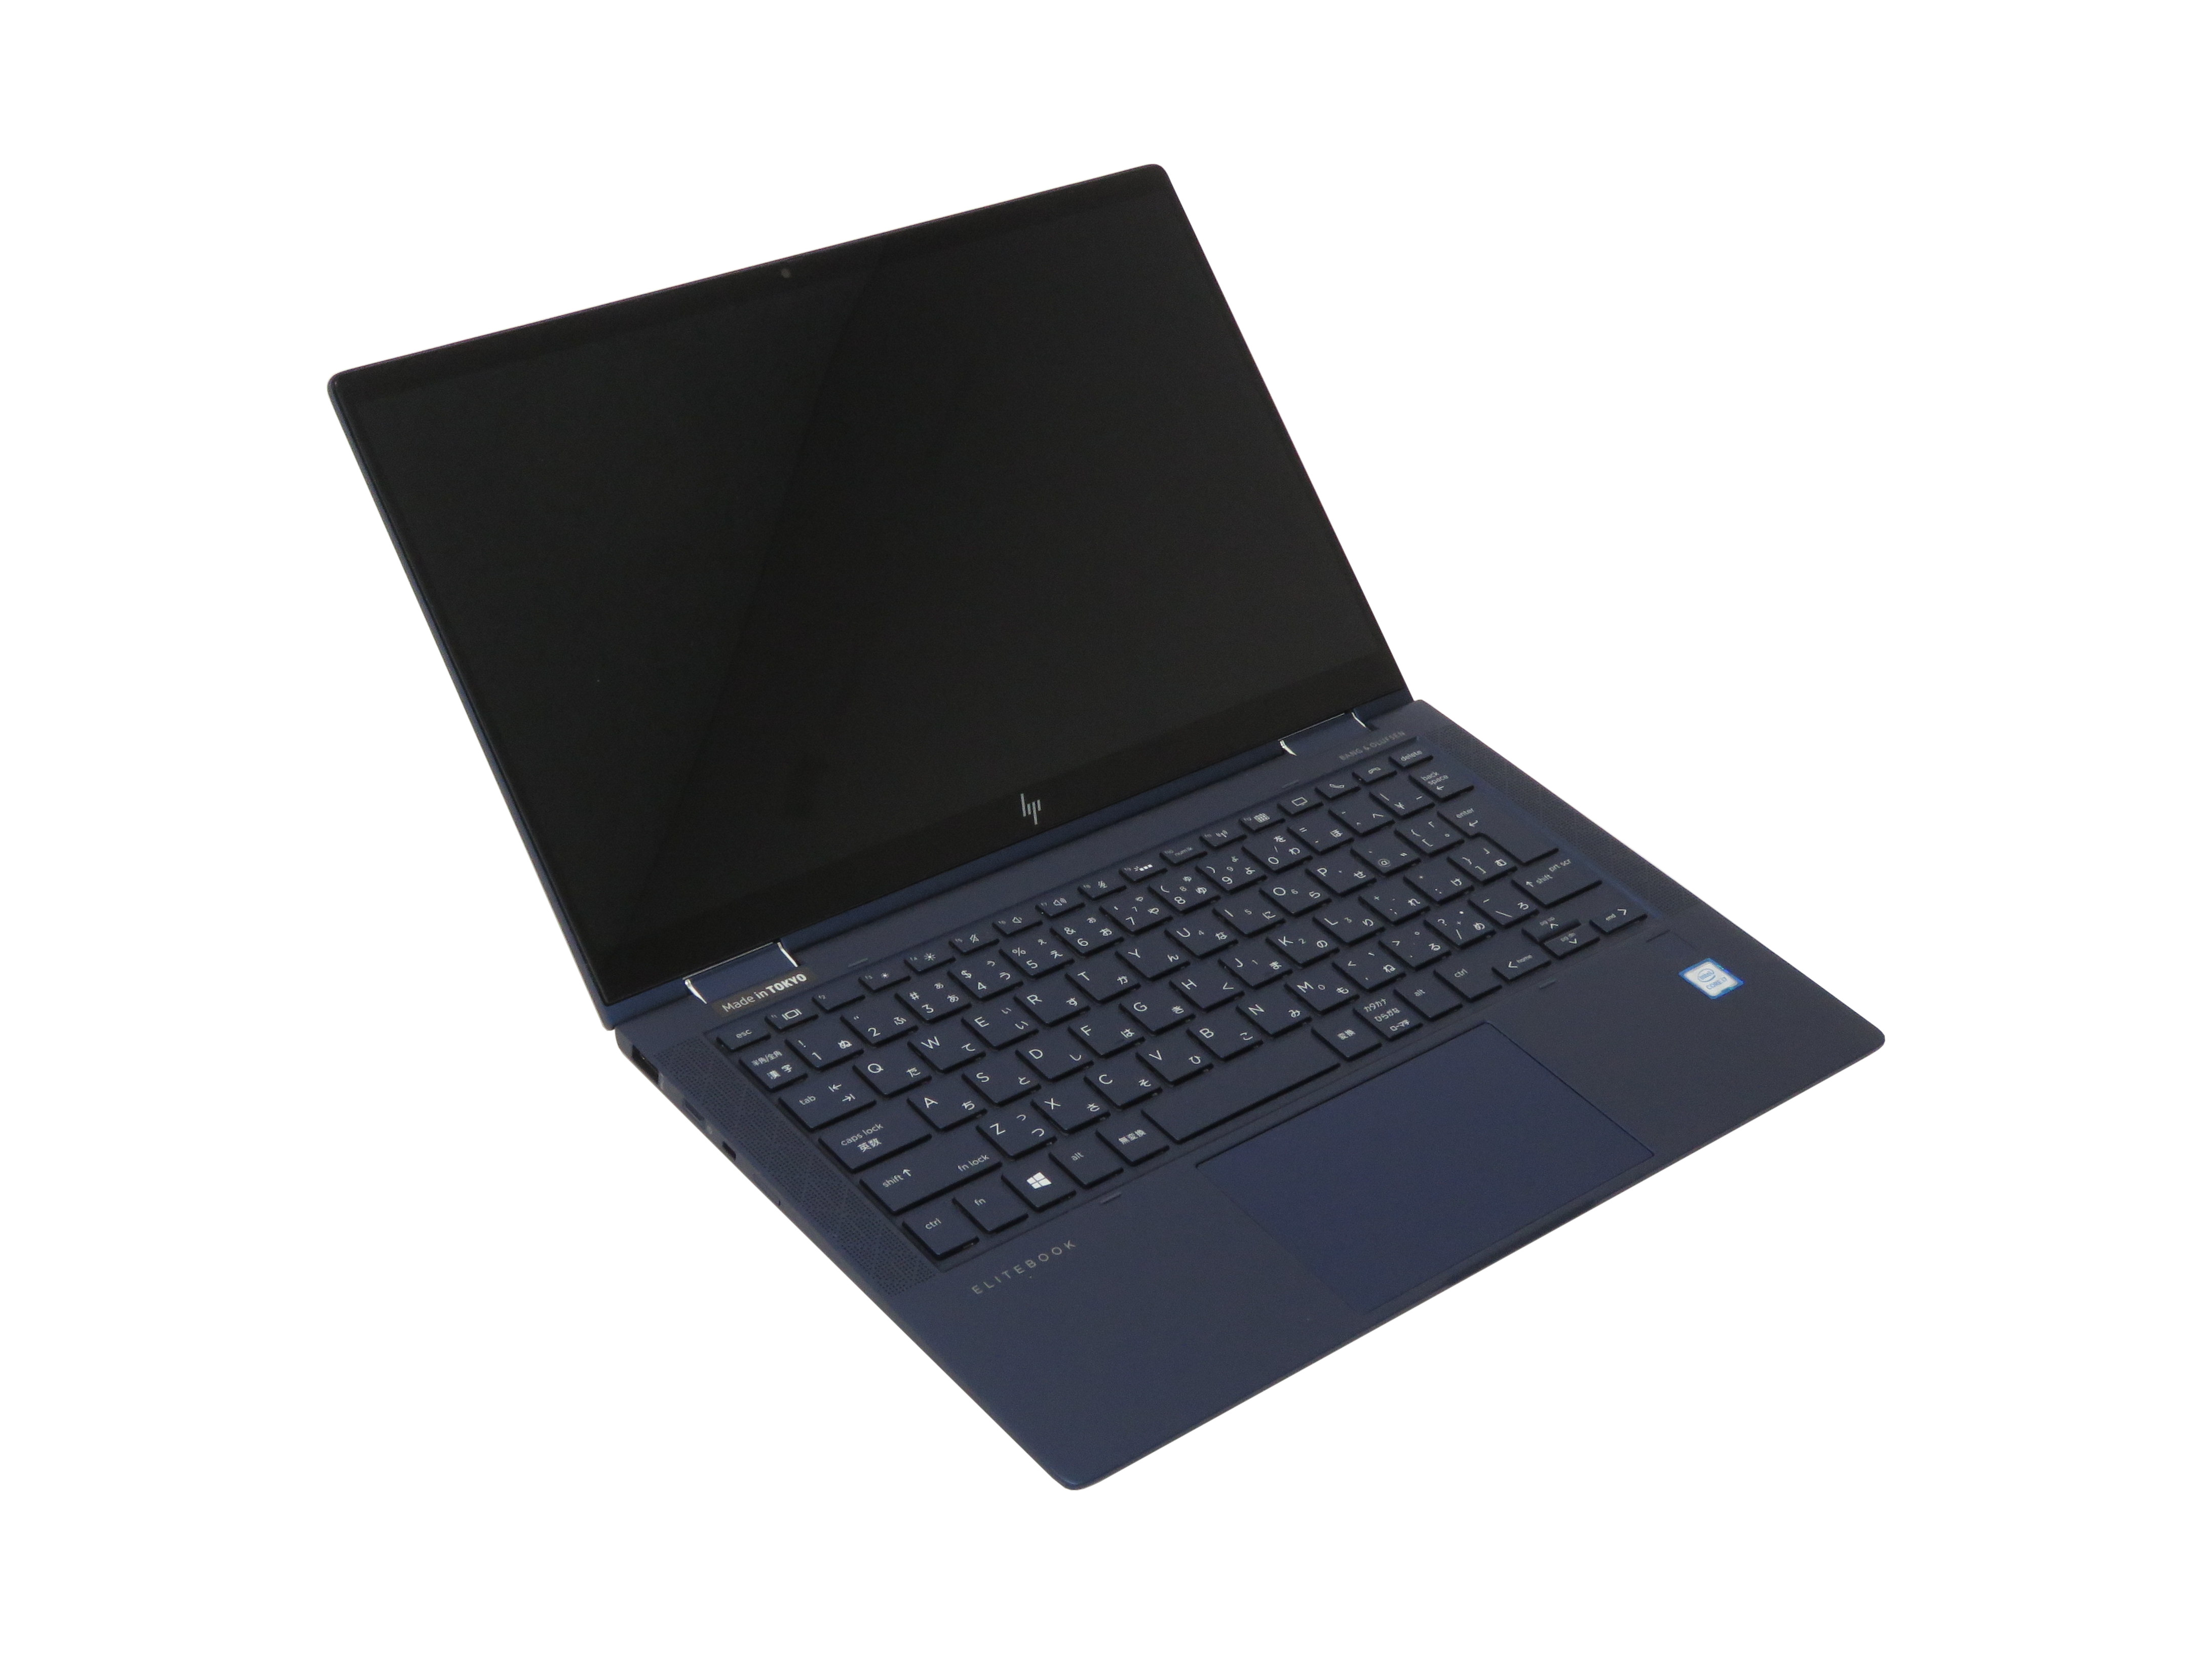 【HP】Elite Dragonfly/CT Notebook PC